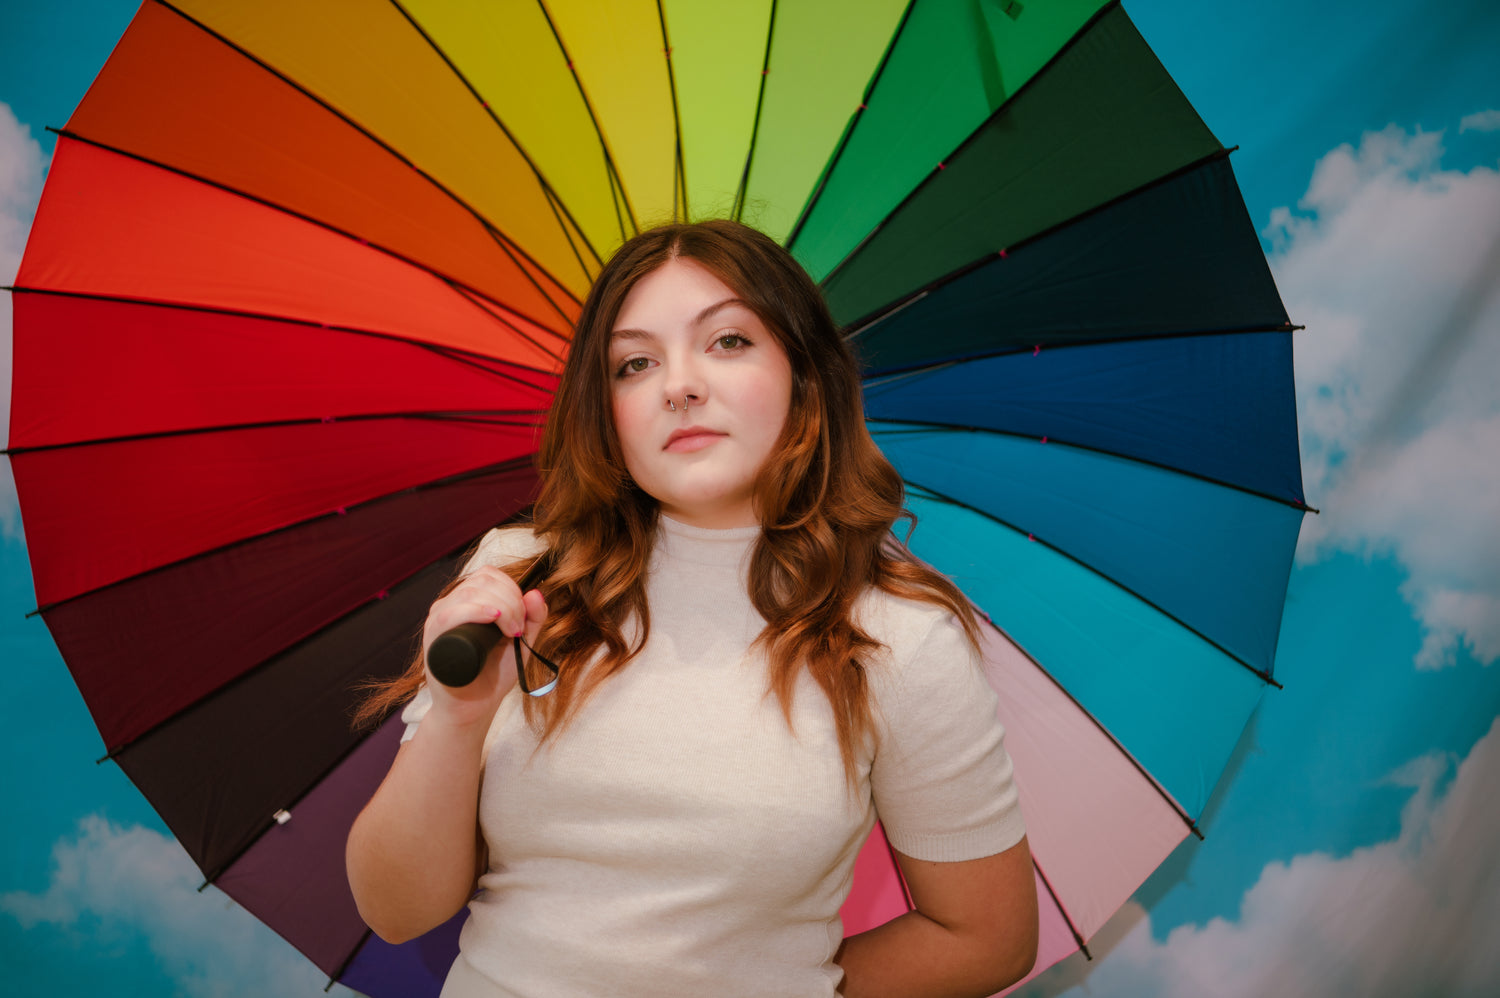 rin stares at the camera holding a full rainbow spectrum umbrella. image by jennifer alsabrook-turner of bang images for basic.'s 2022 pride campaign.